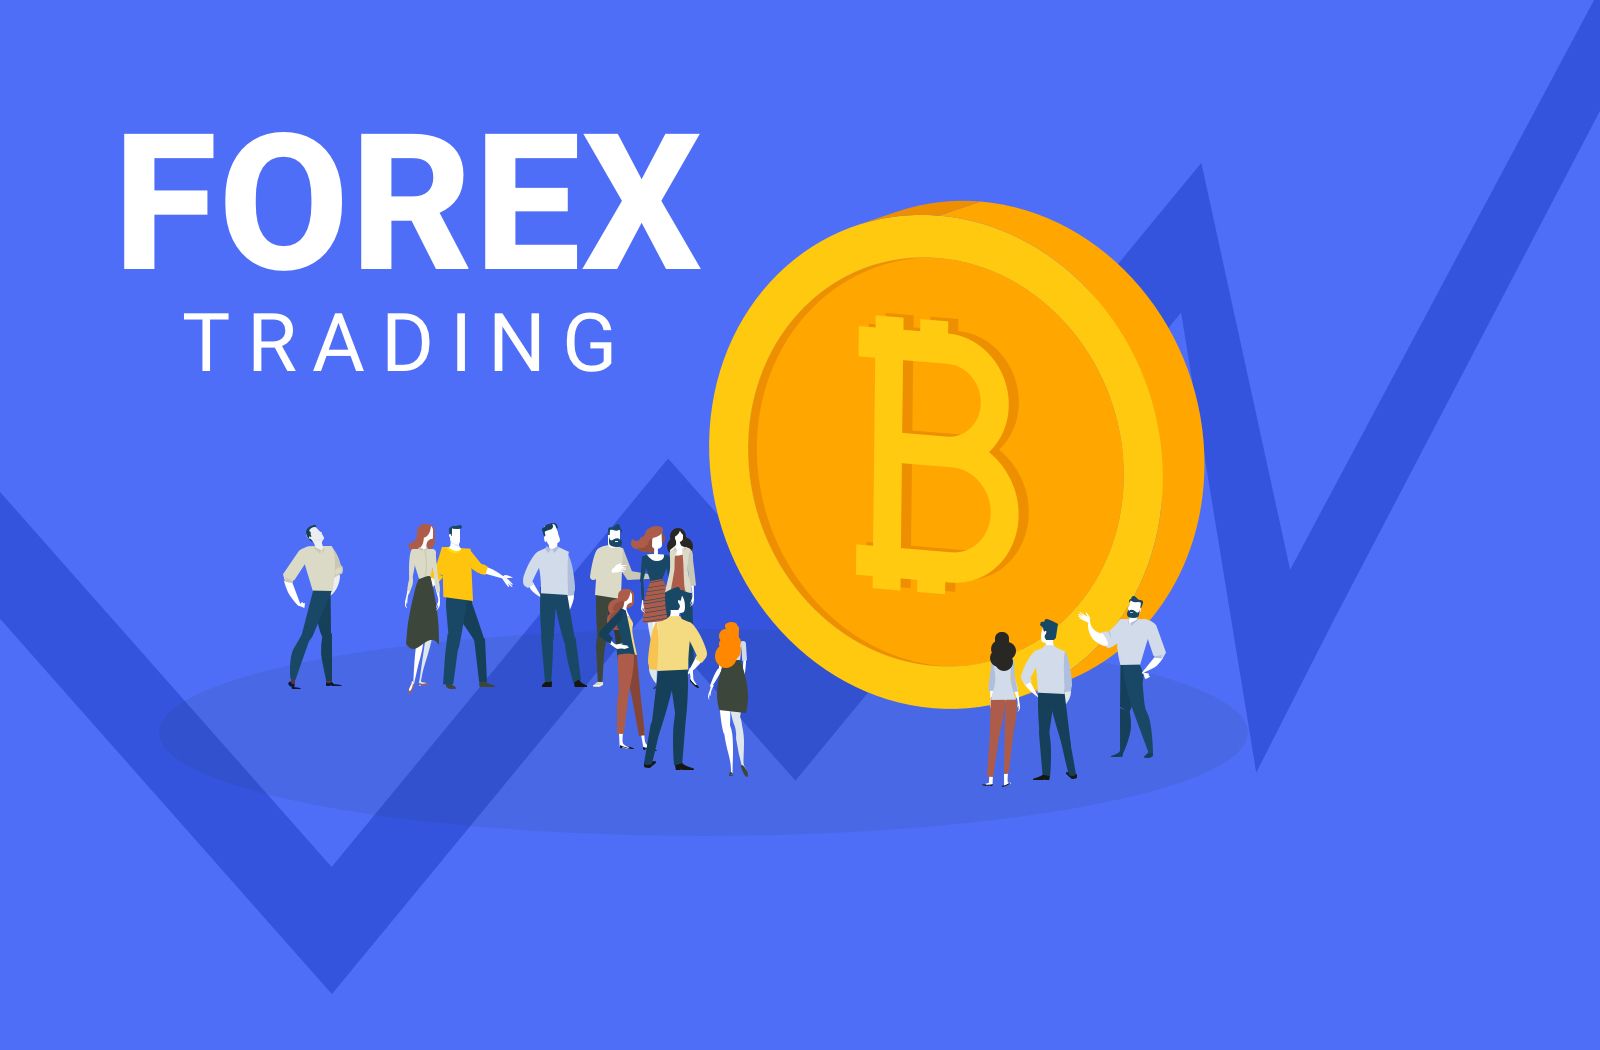 Forex & Crypto Trading Online | FX Markets | Cryptocurrencies, Spot Metals & CFDs | XBTFX